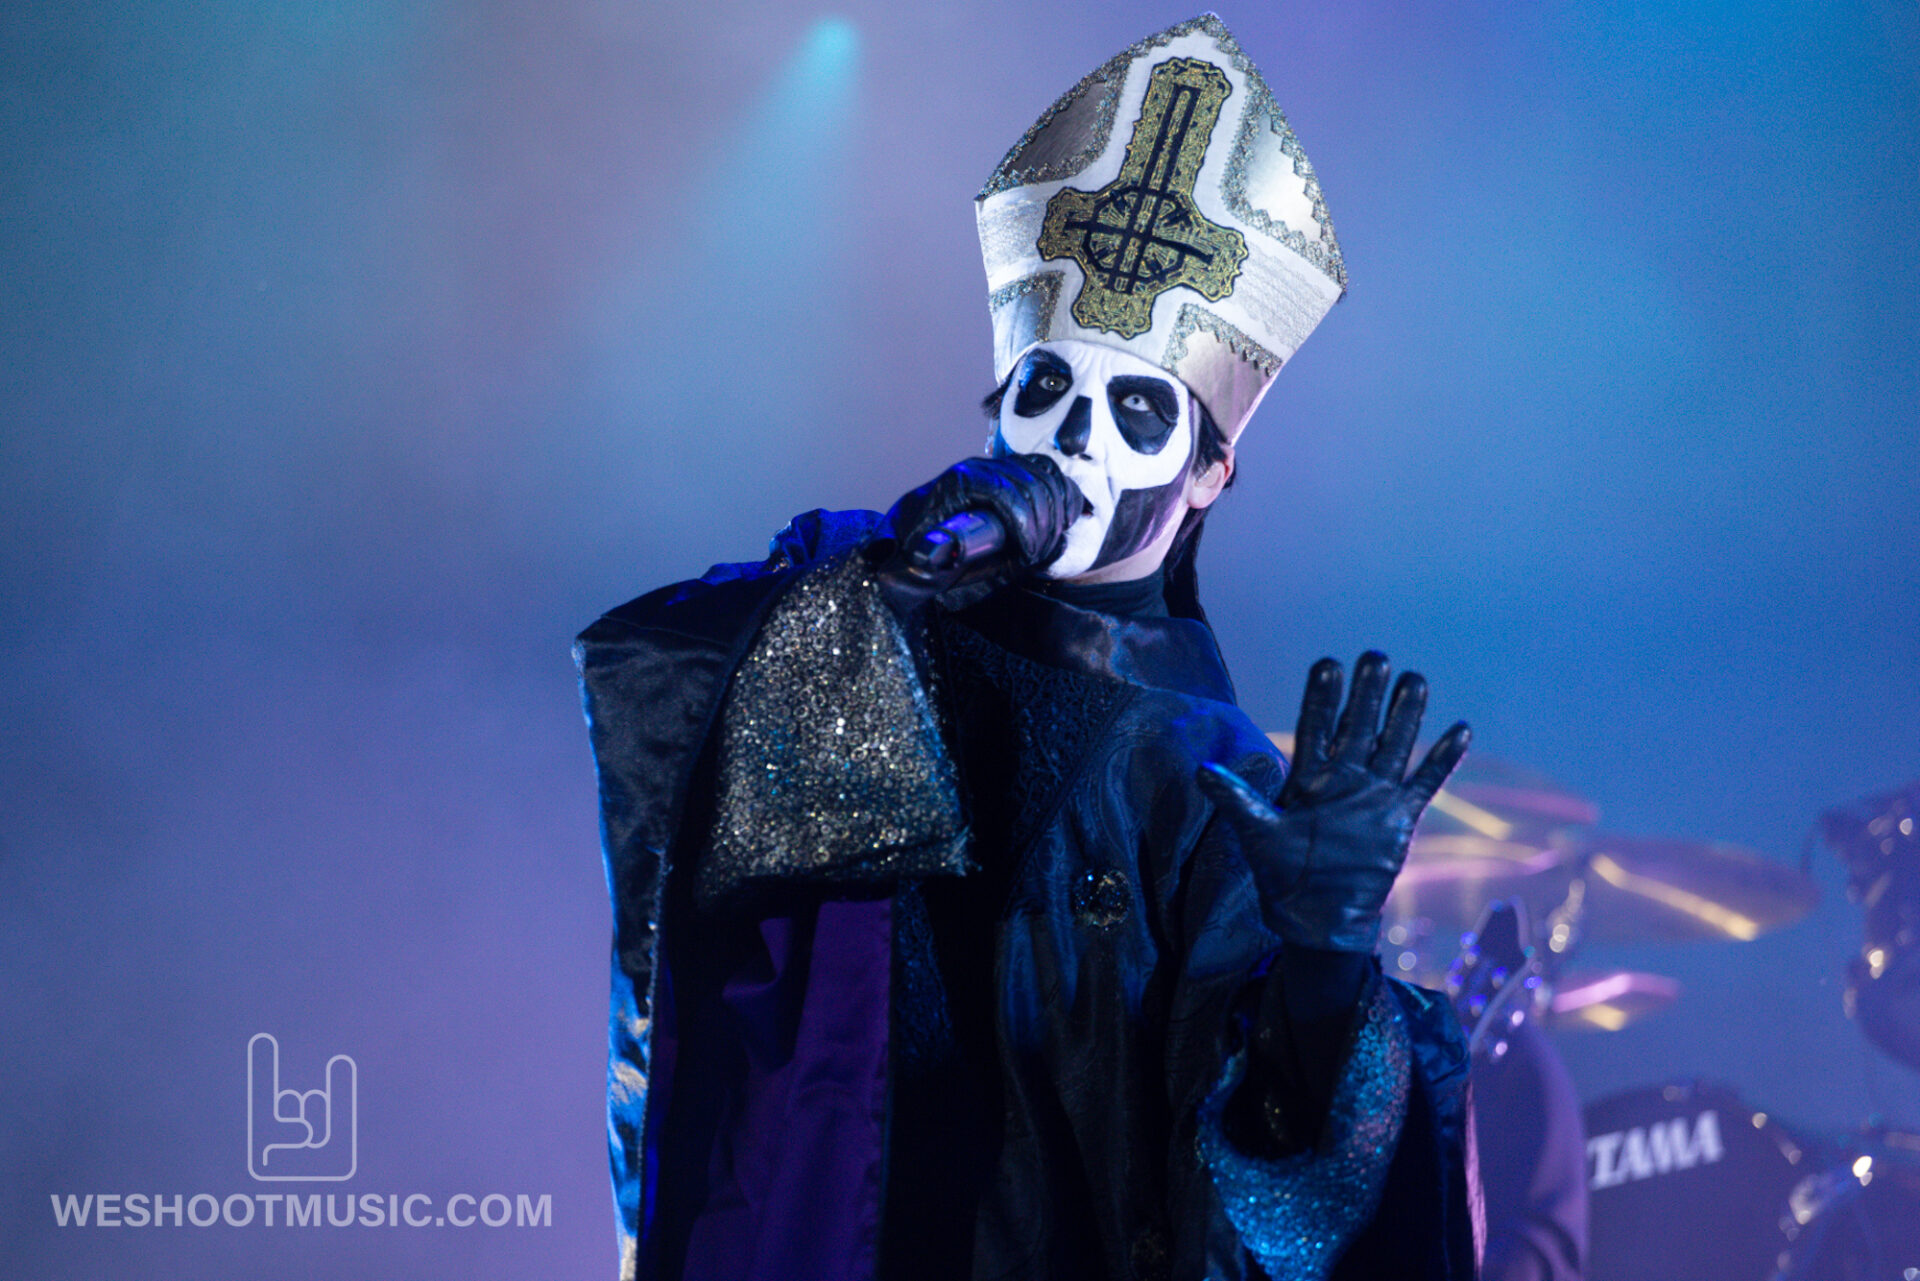 Ghost at Bloodstock 2017